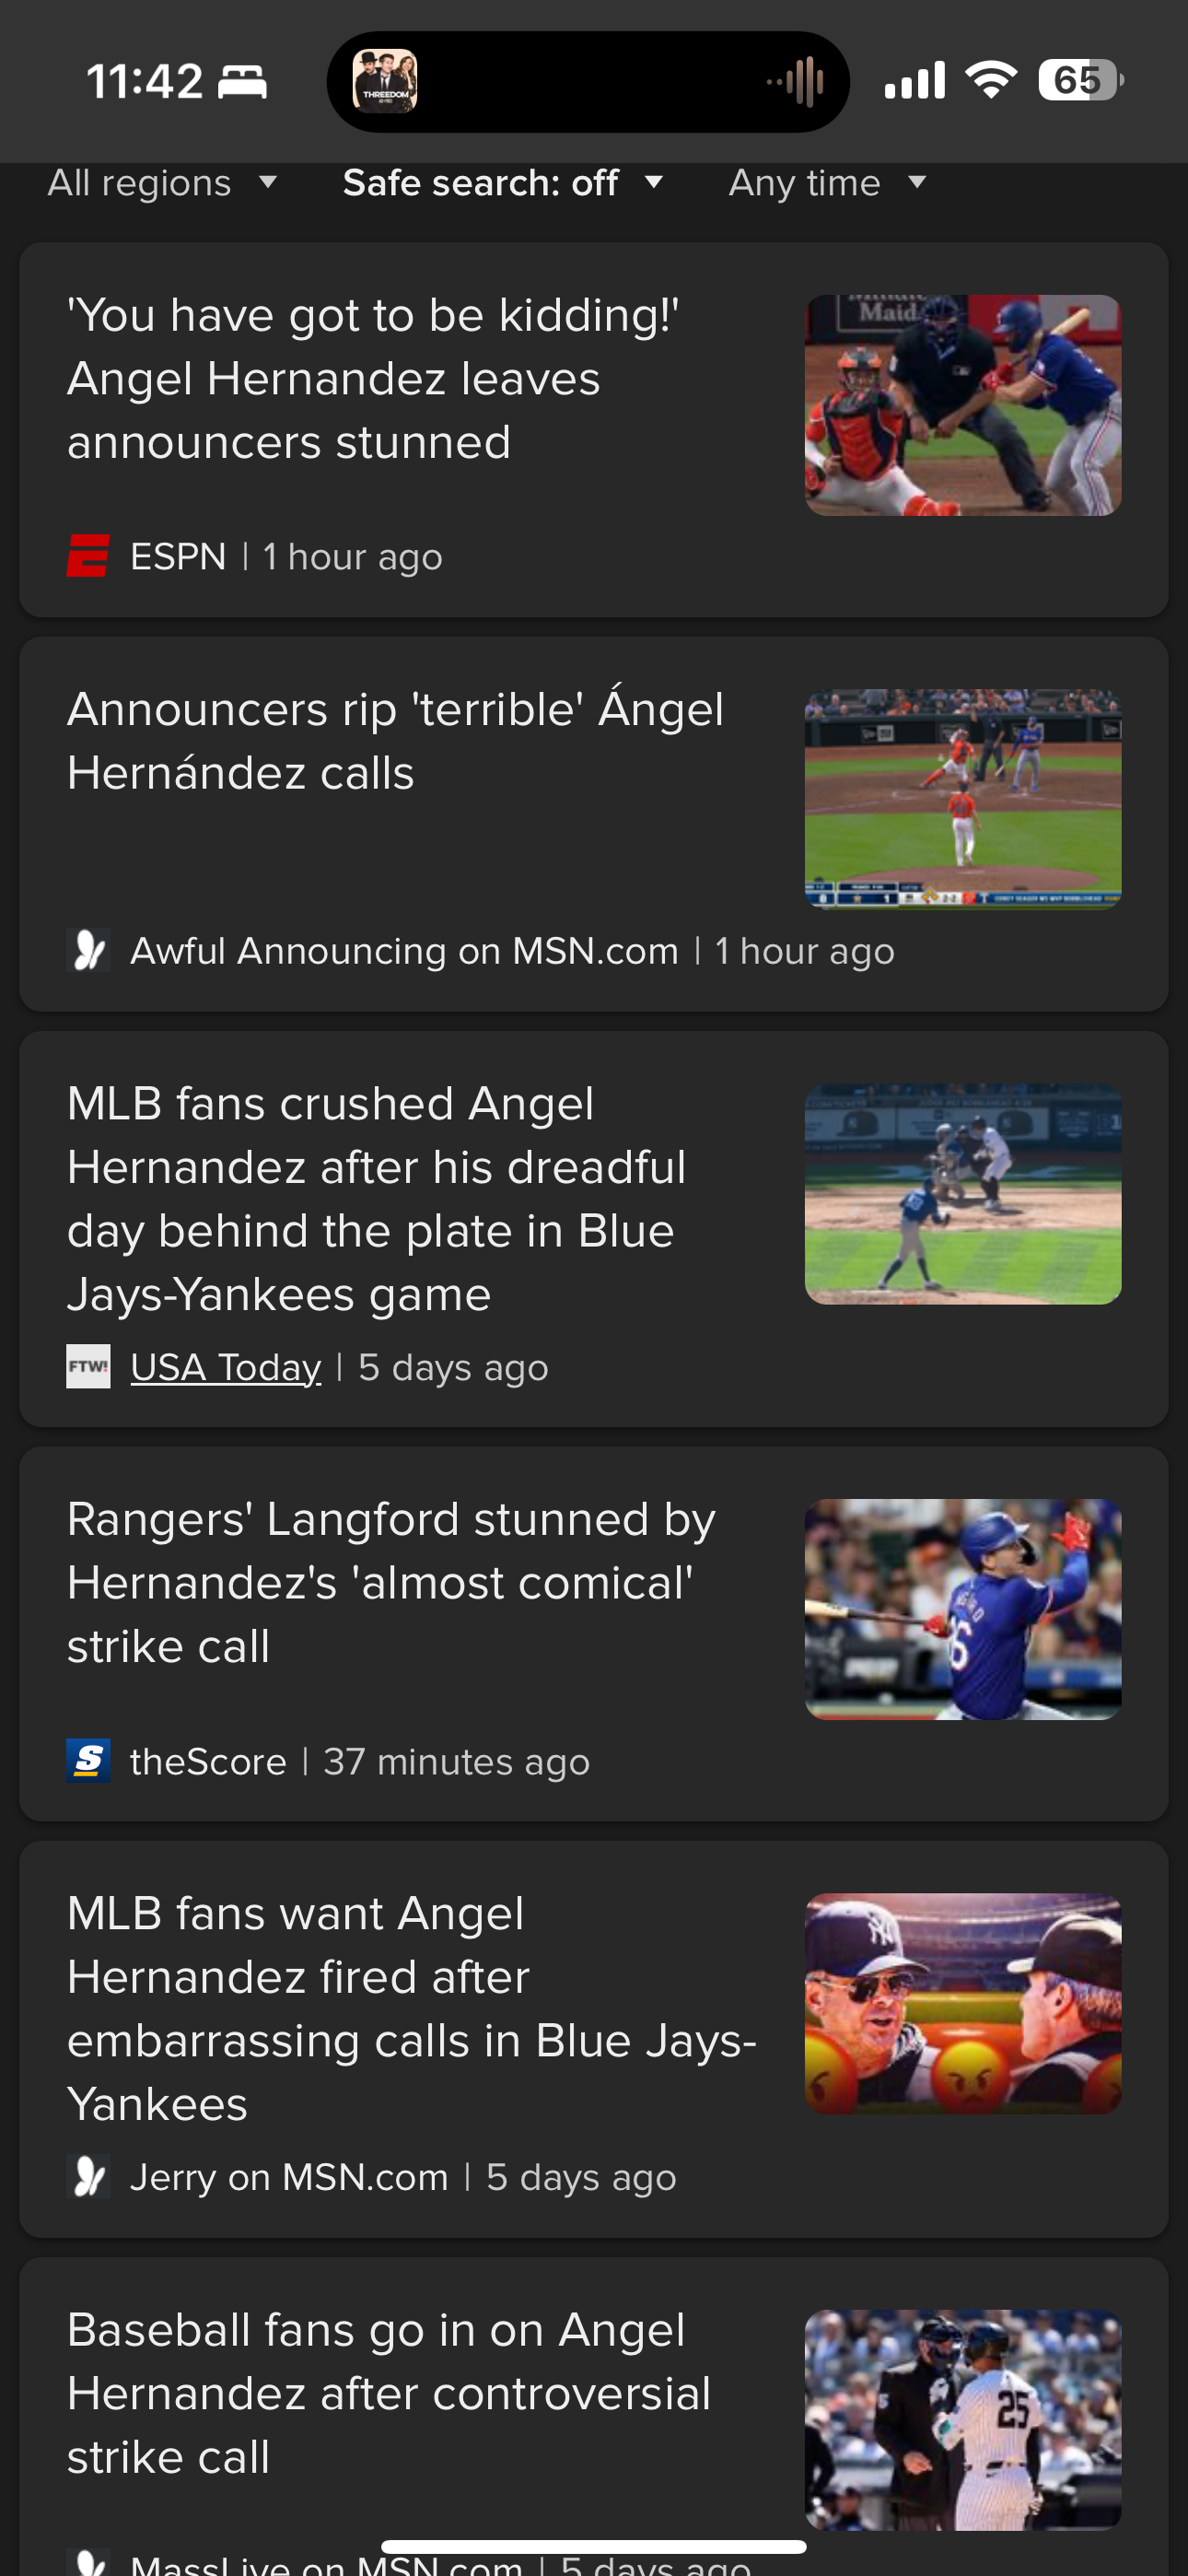 News articles from the last week of multiple blown calls by Major League Baseball umpire Angel Hernandez